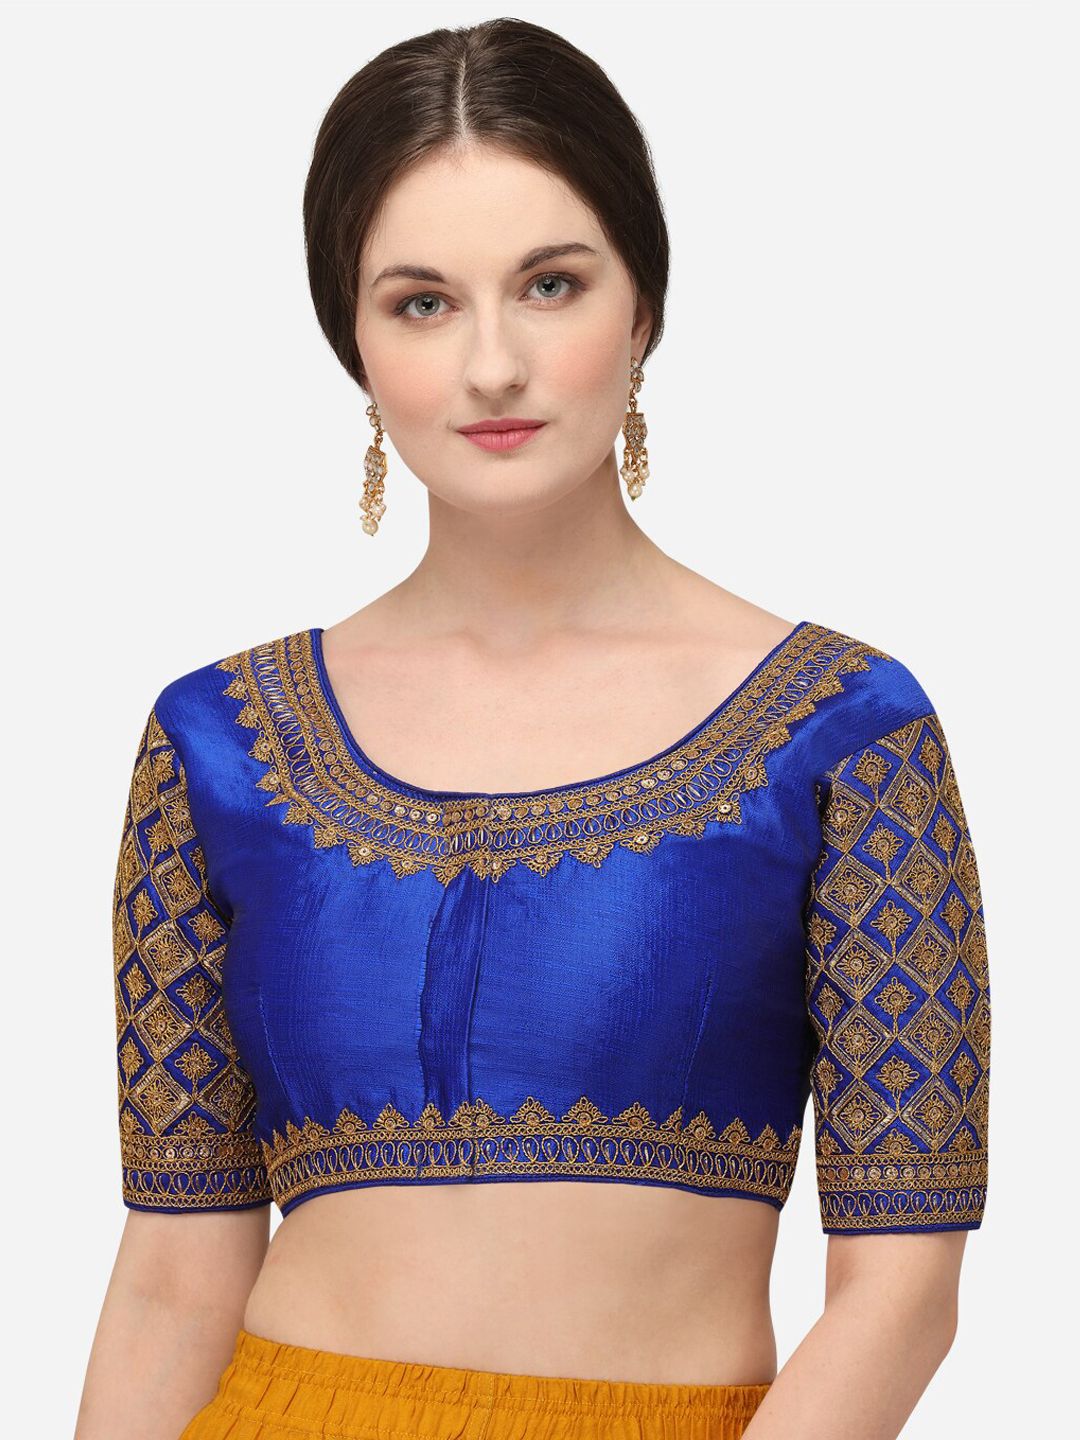 Fab Viva Women Embroidered Blue Saree Blouse Price in India